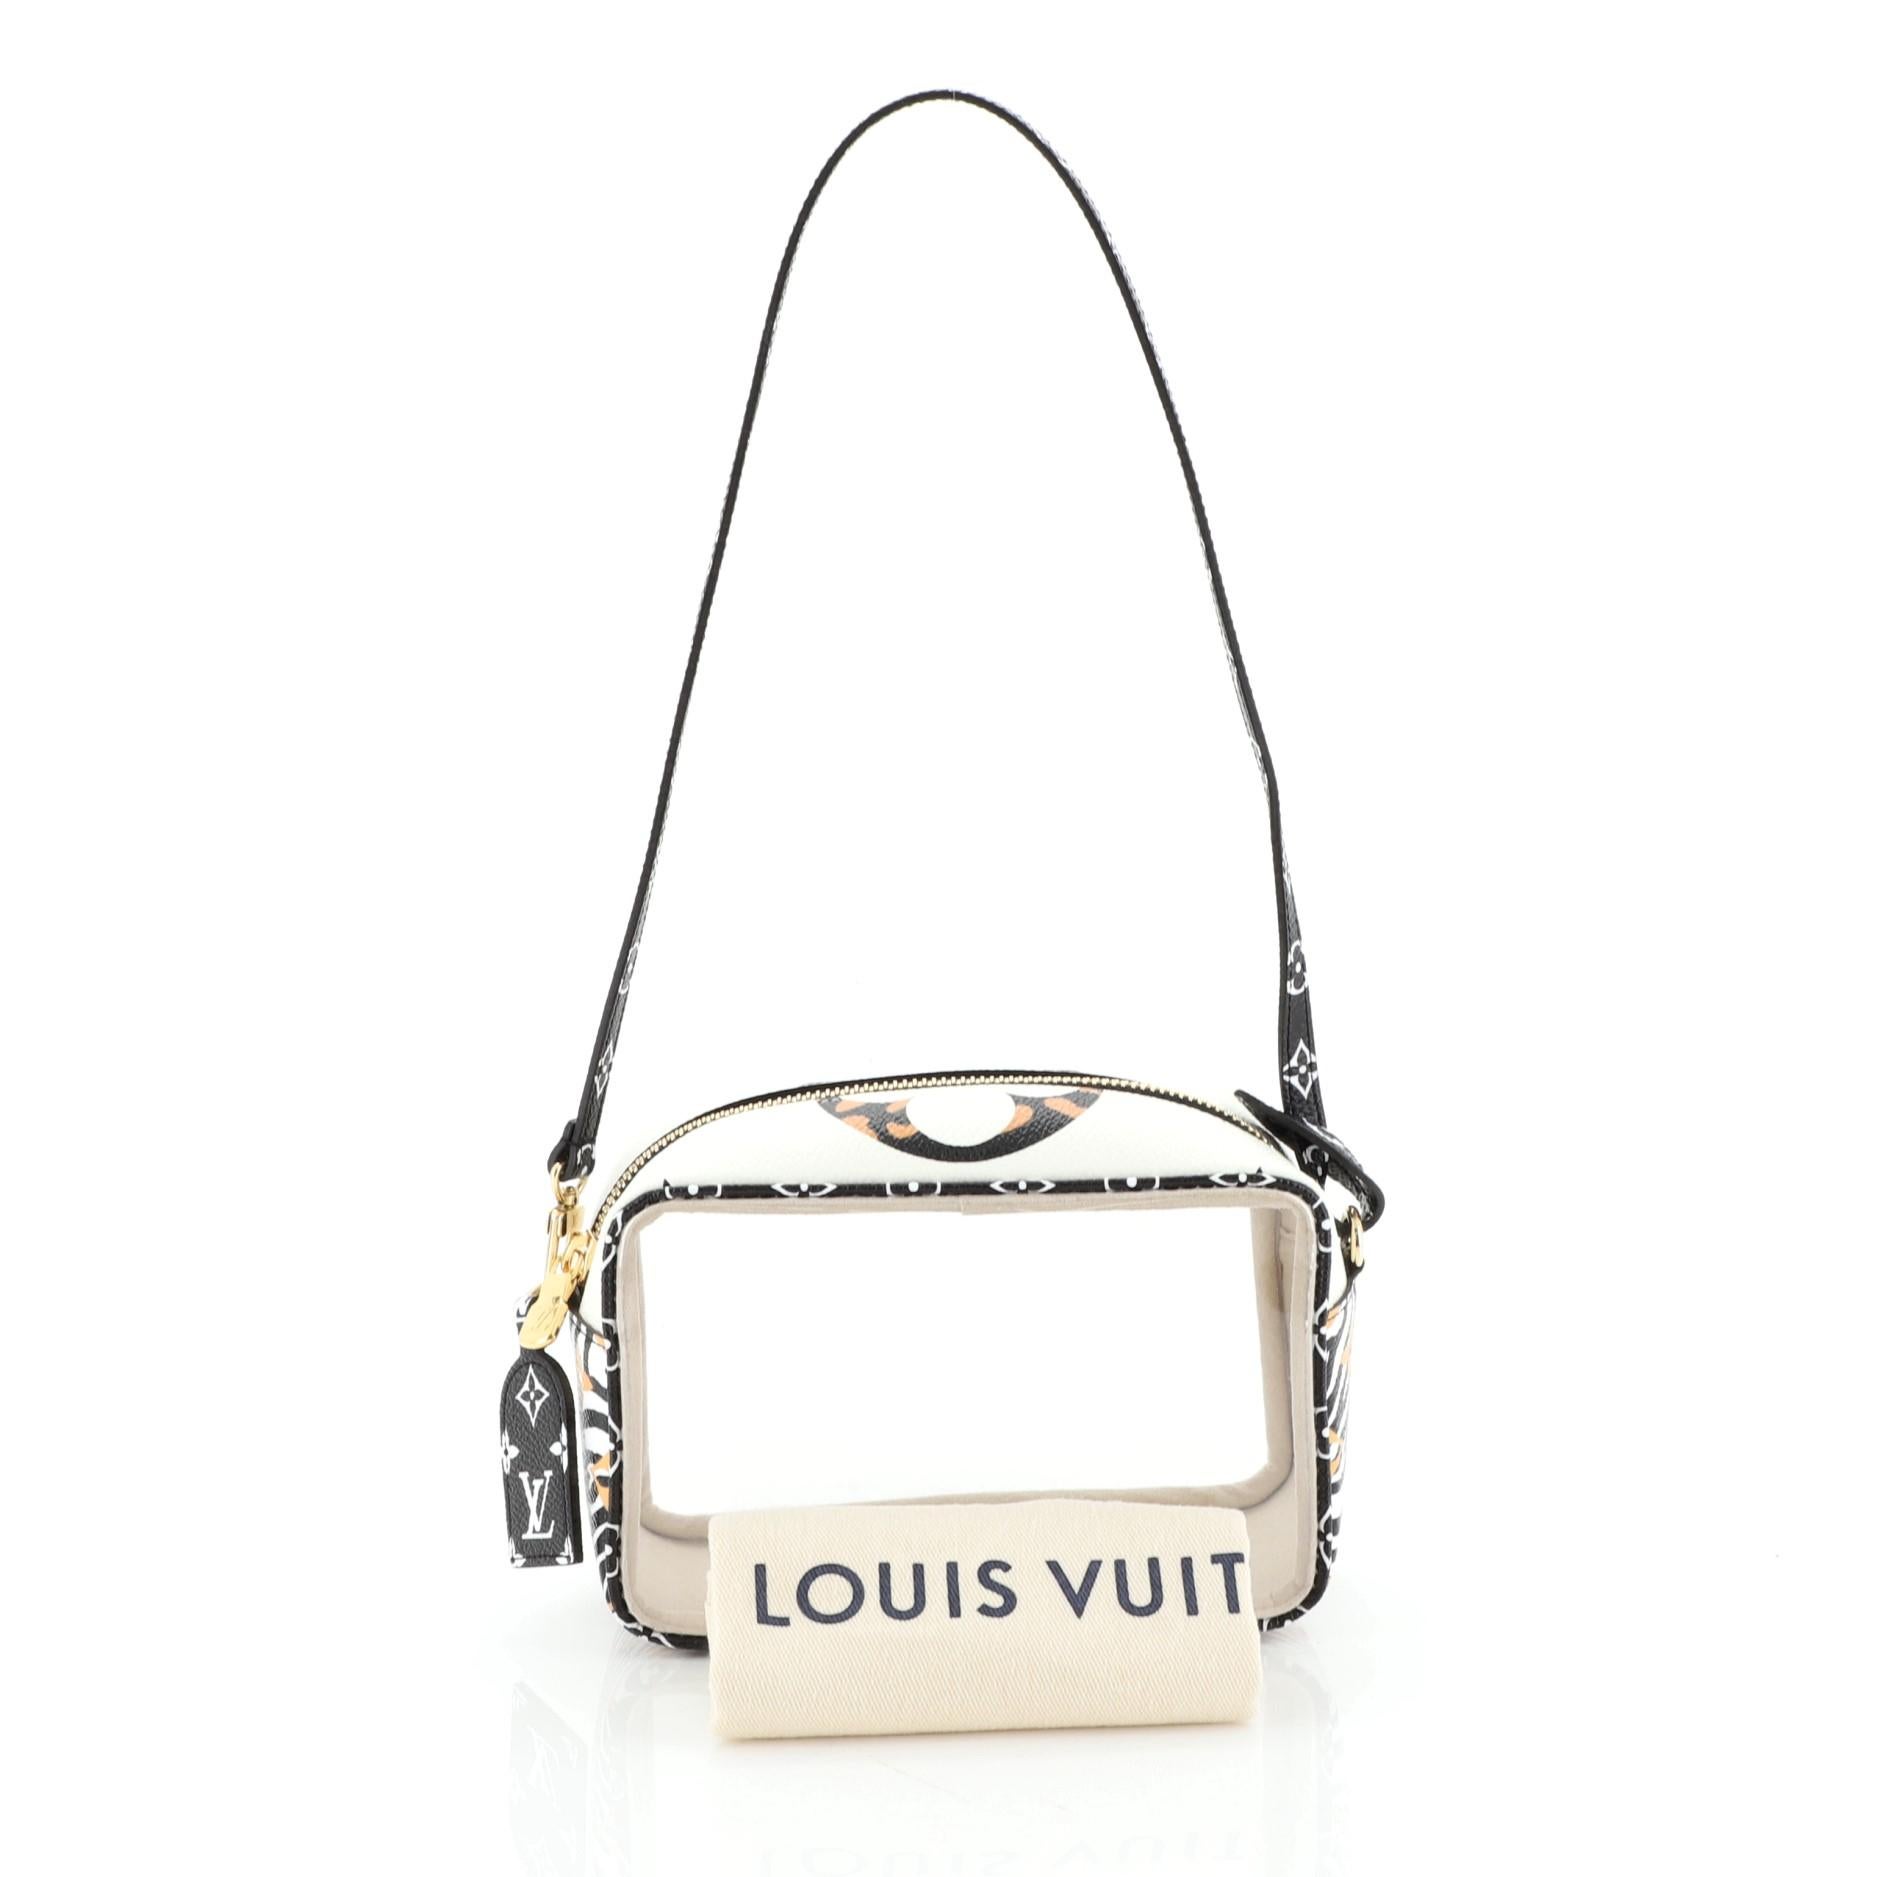 This Louis Vuitton Beach Pouch Limited Edition Jungle Monogram Giant, crafted from clear PVC and white coated canvas, features shoulder strap, and gold tone hardware. Its zip closure opens to a neutral microfiber and PVC interior. Authenticy code